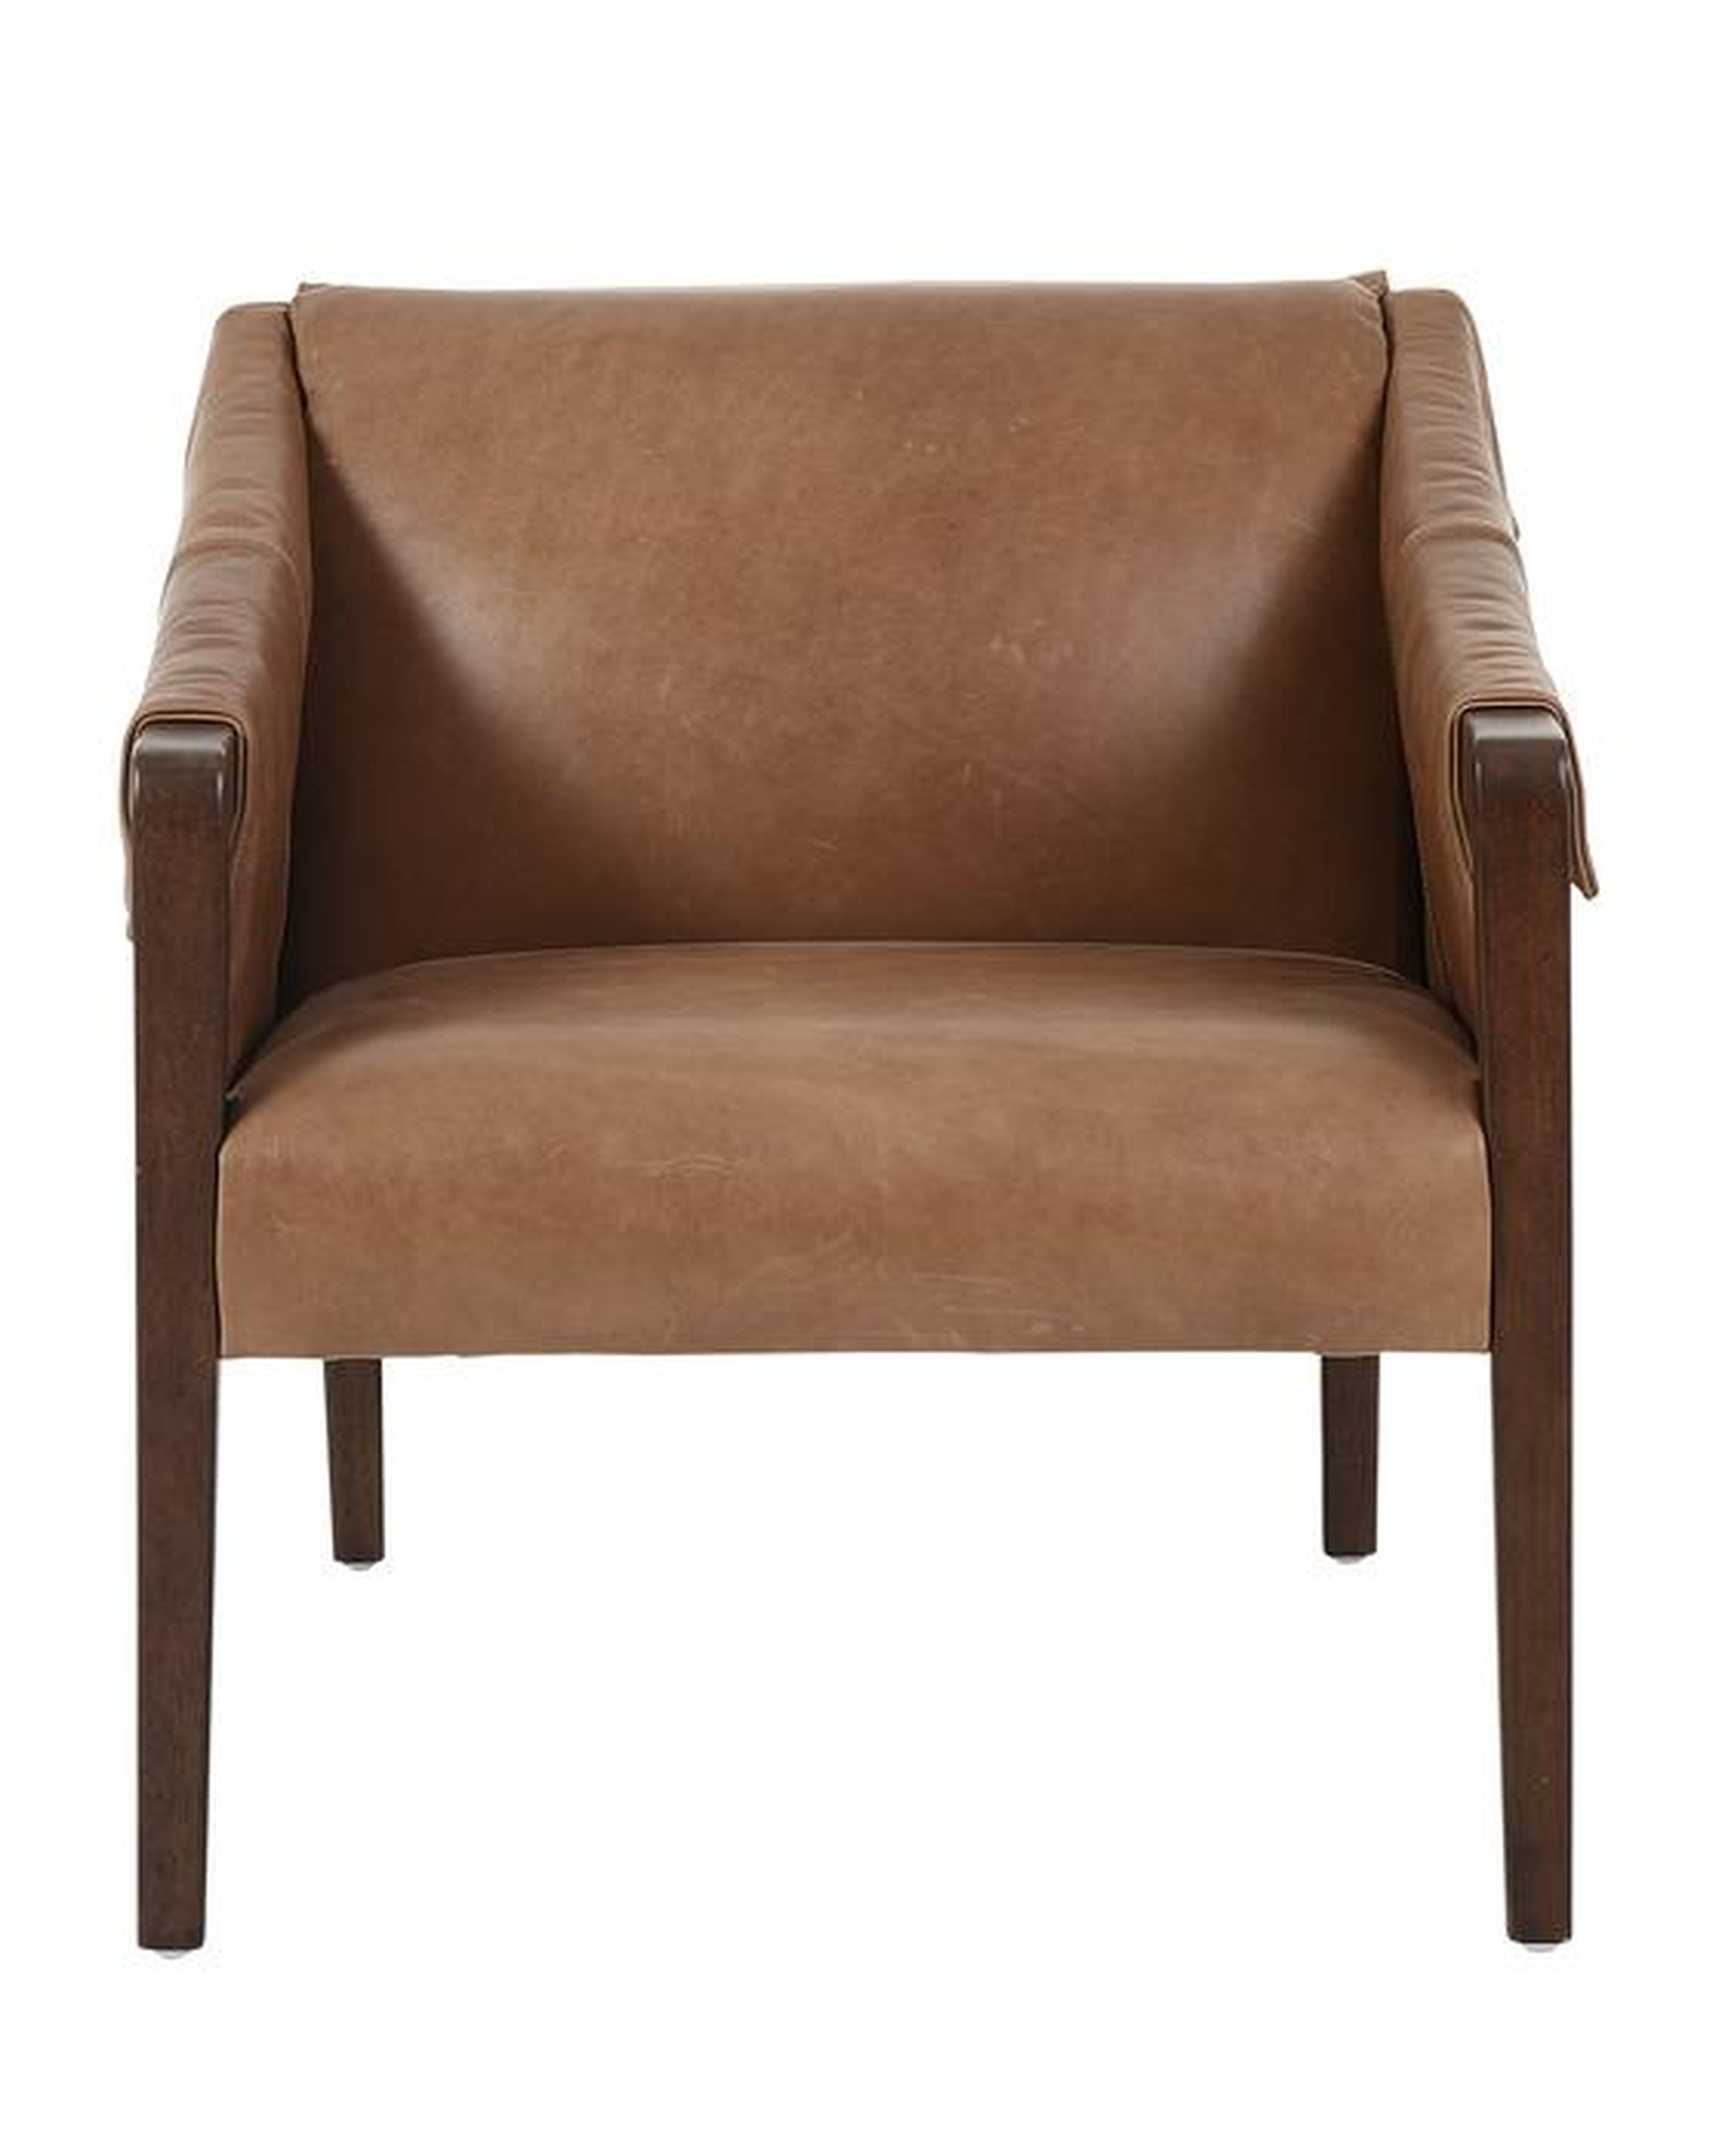 PAYSON LEATHER CHAIR - McGee & Co.